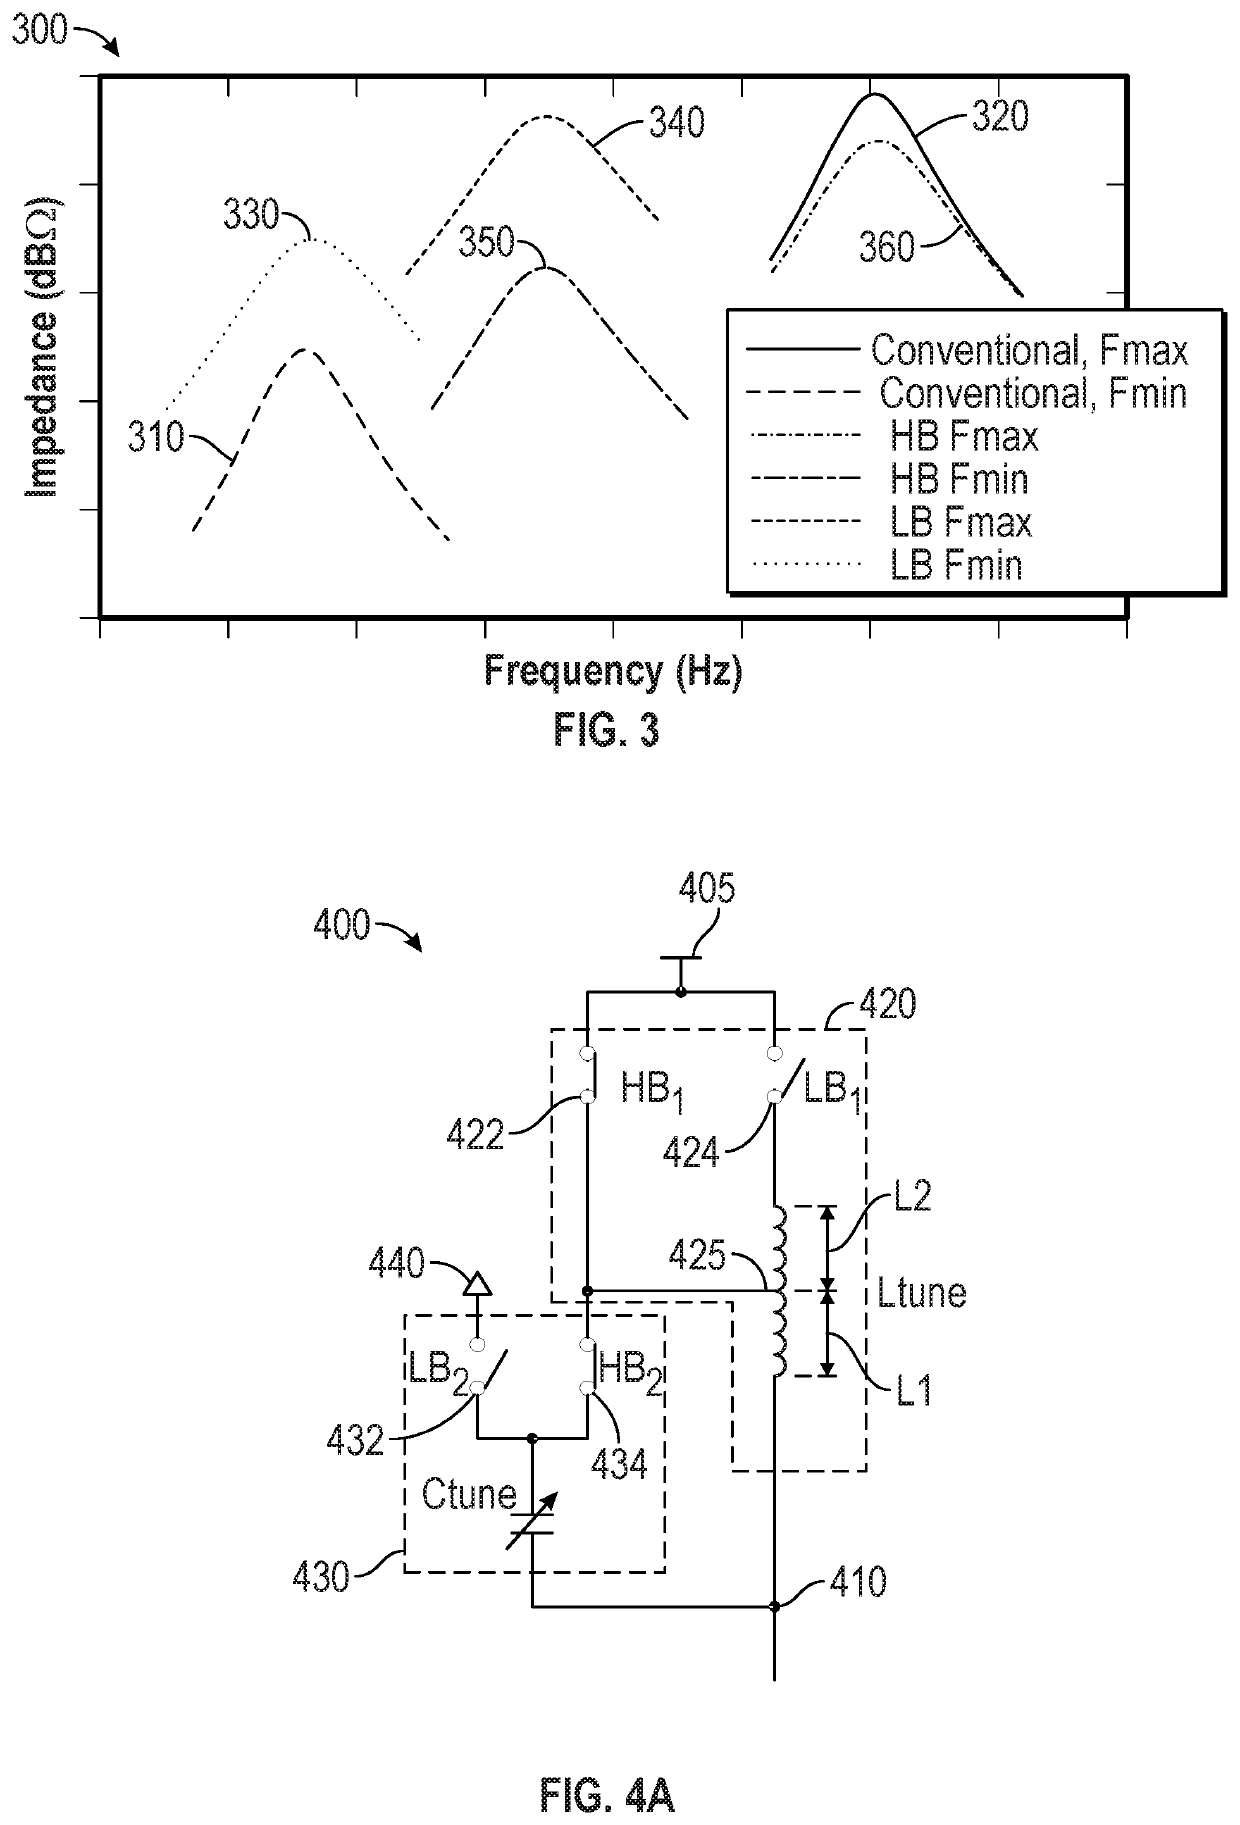 Providing a programmable inductor to enable wide tuning range